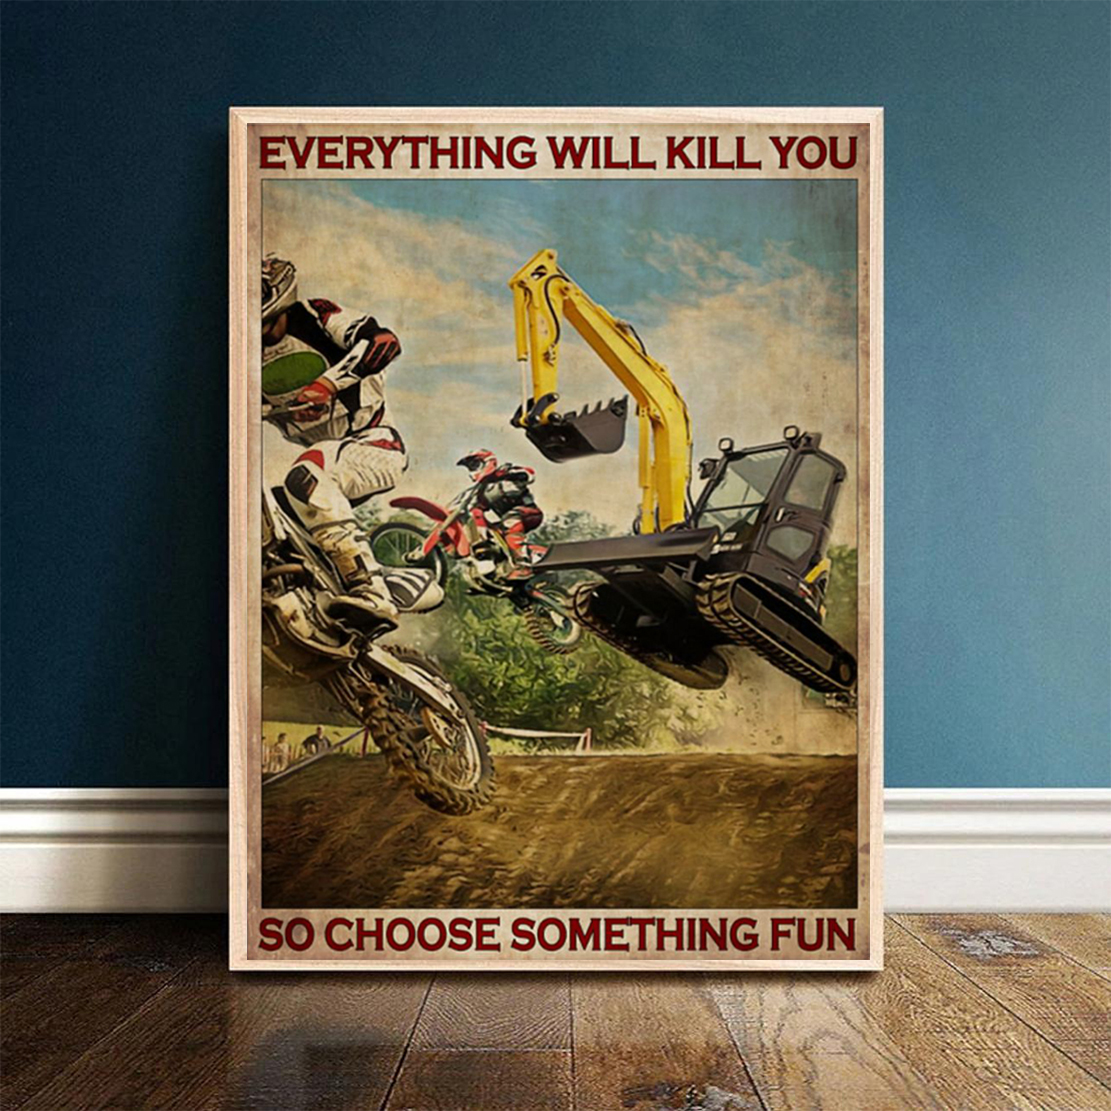 Motorcross and excavator everything will kill you so choose something fun poster